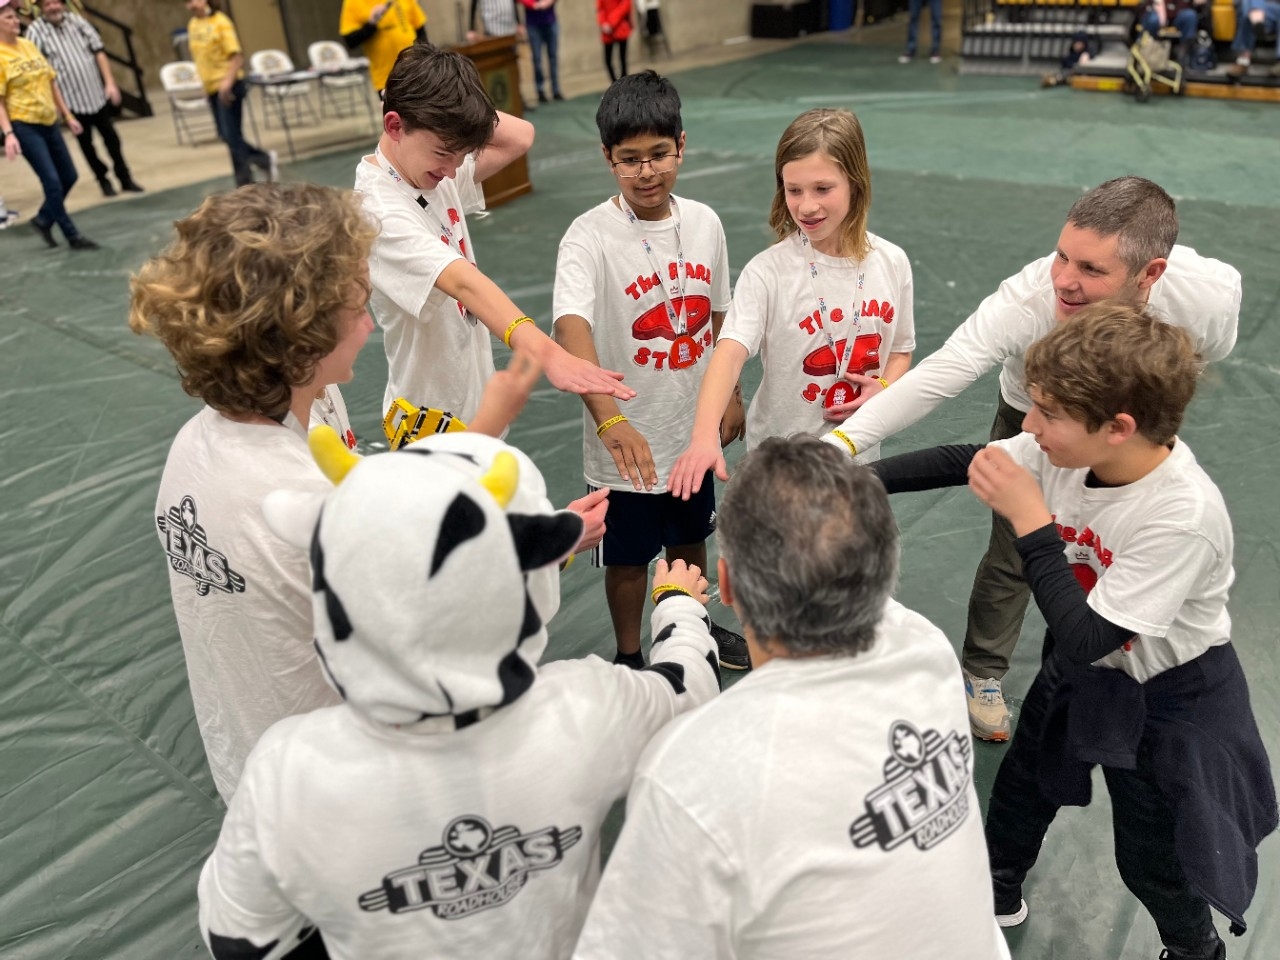 An award-winning teams puts their hands in for a victory cheer at the FIRST LEGO League Championship Tournament